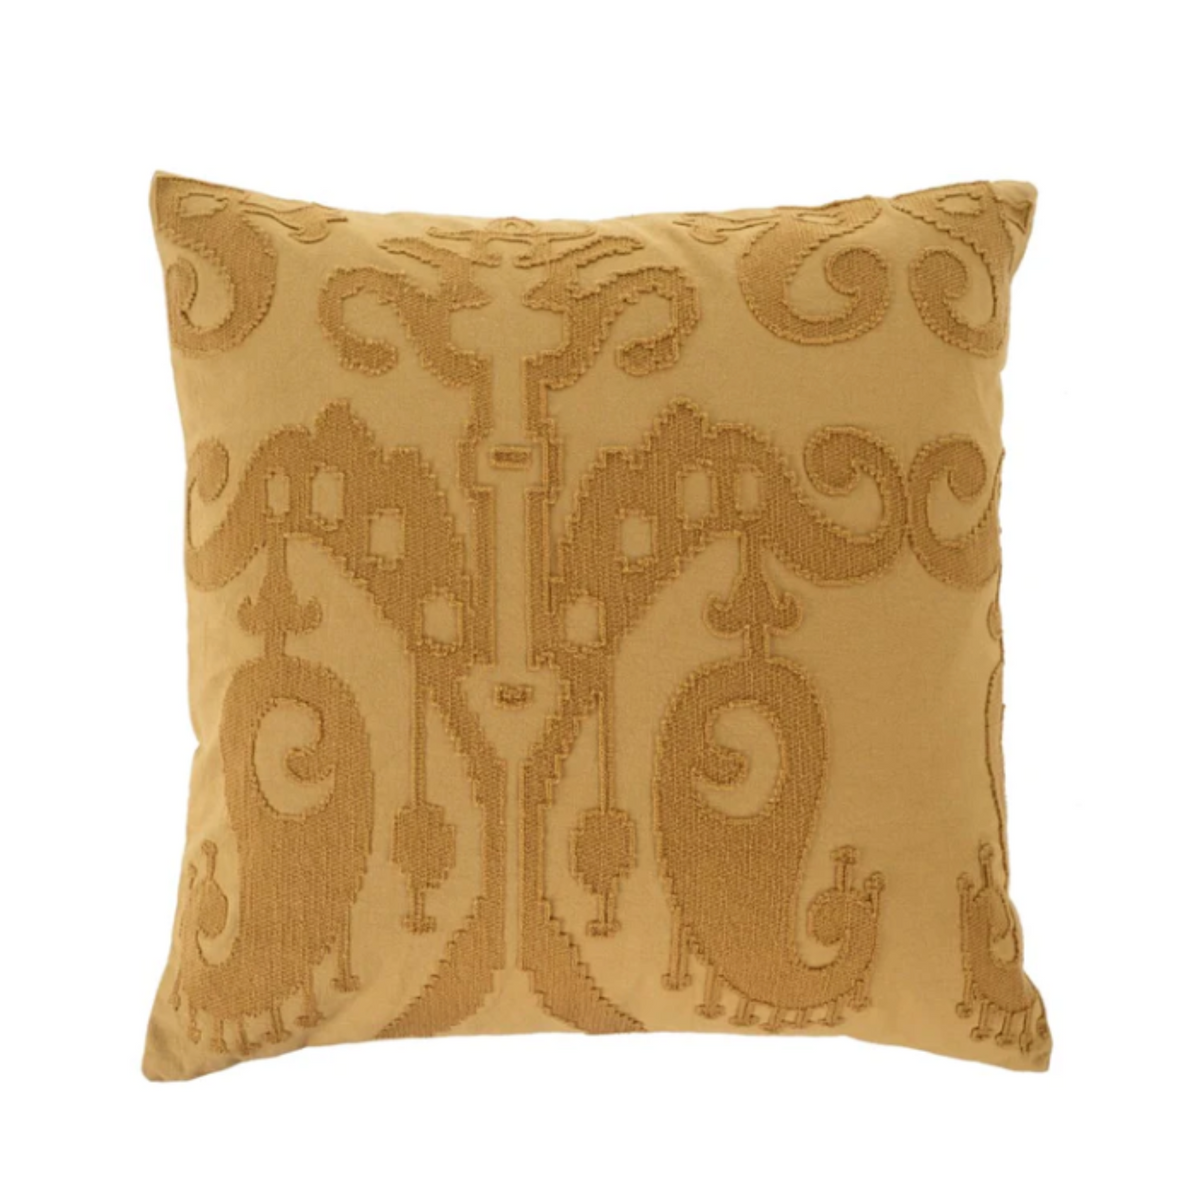 Embroidered Ikat Pillow - Clay